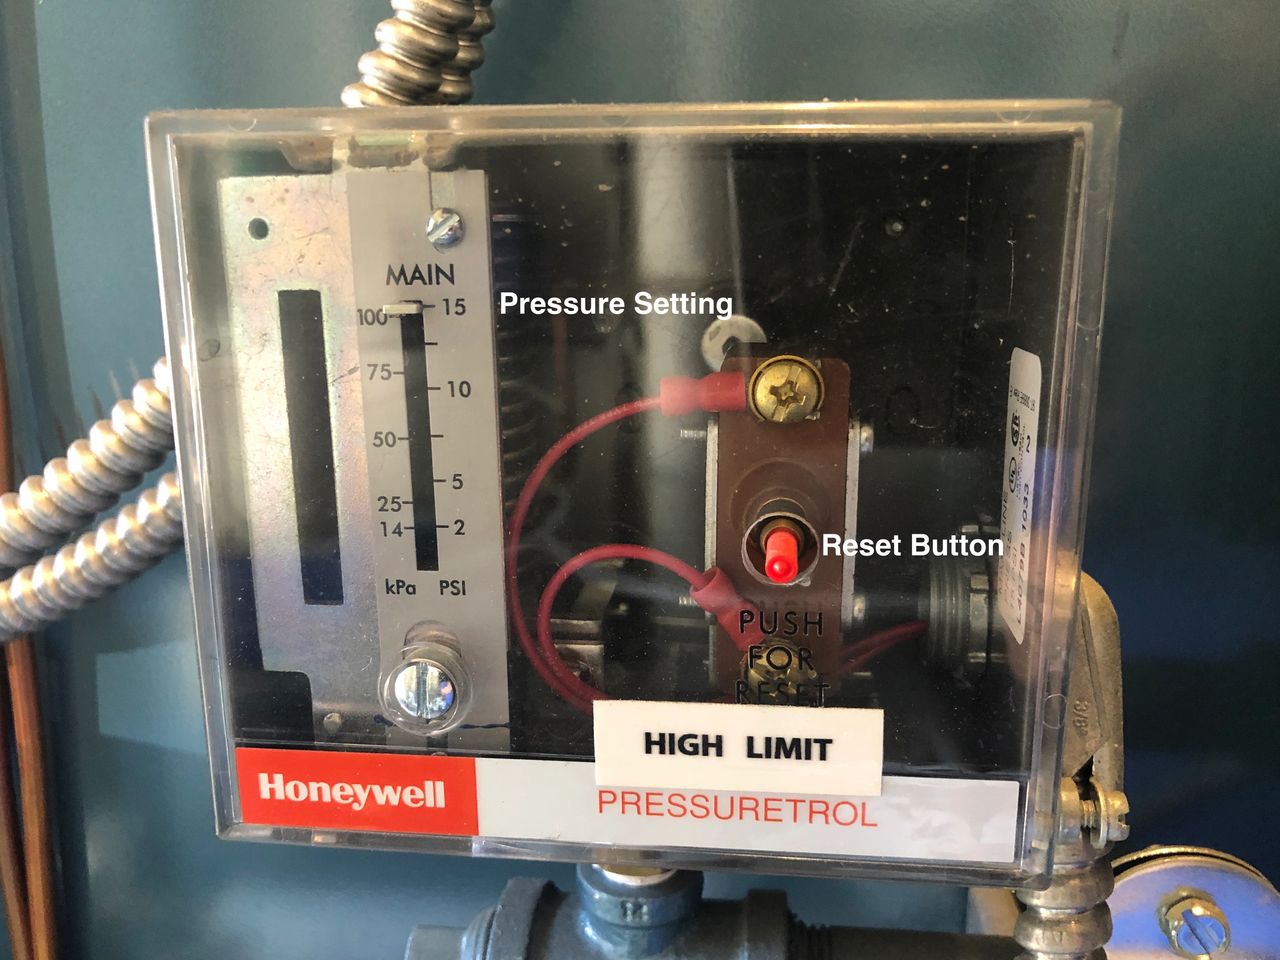 Why is the boiler tripping the pressure control?